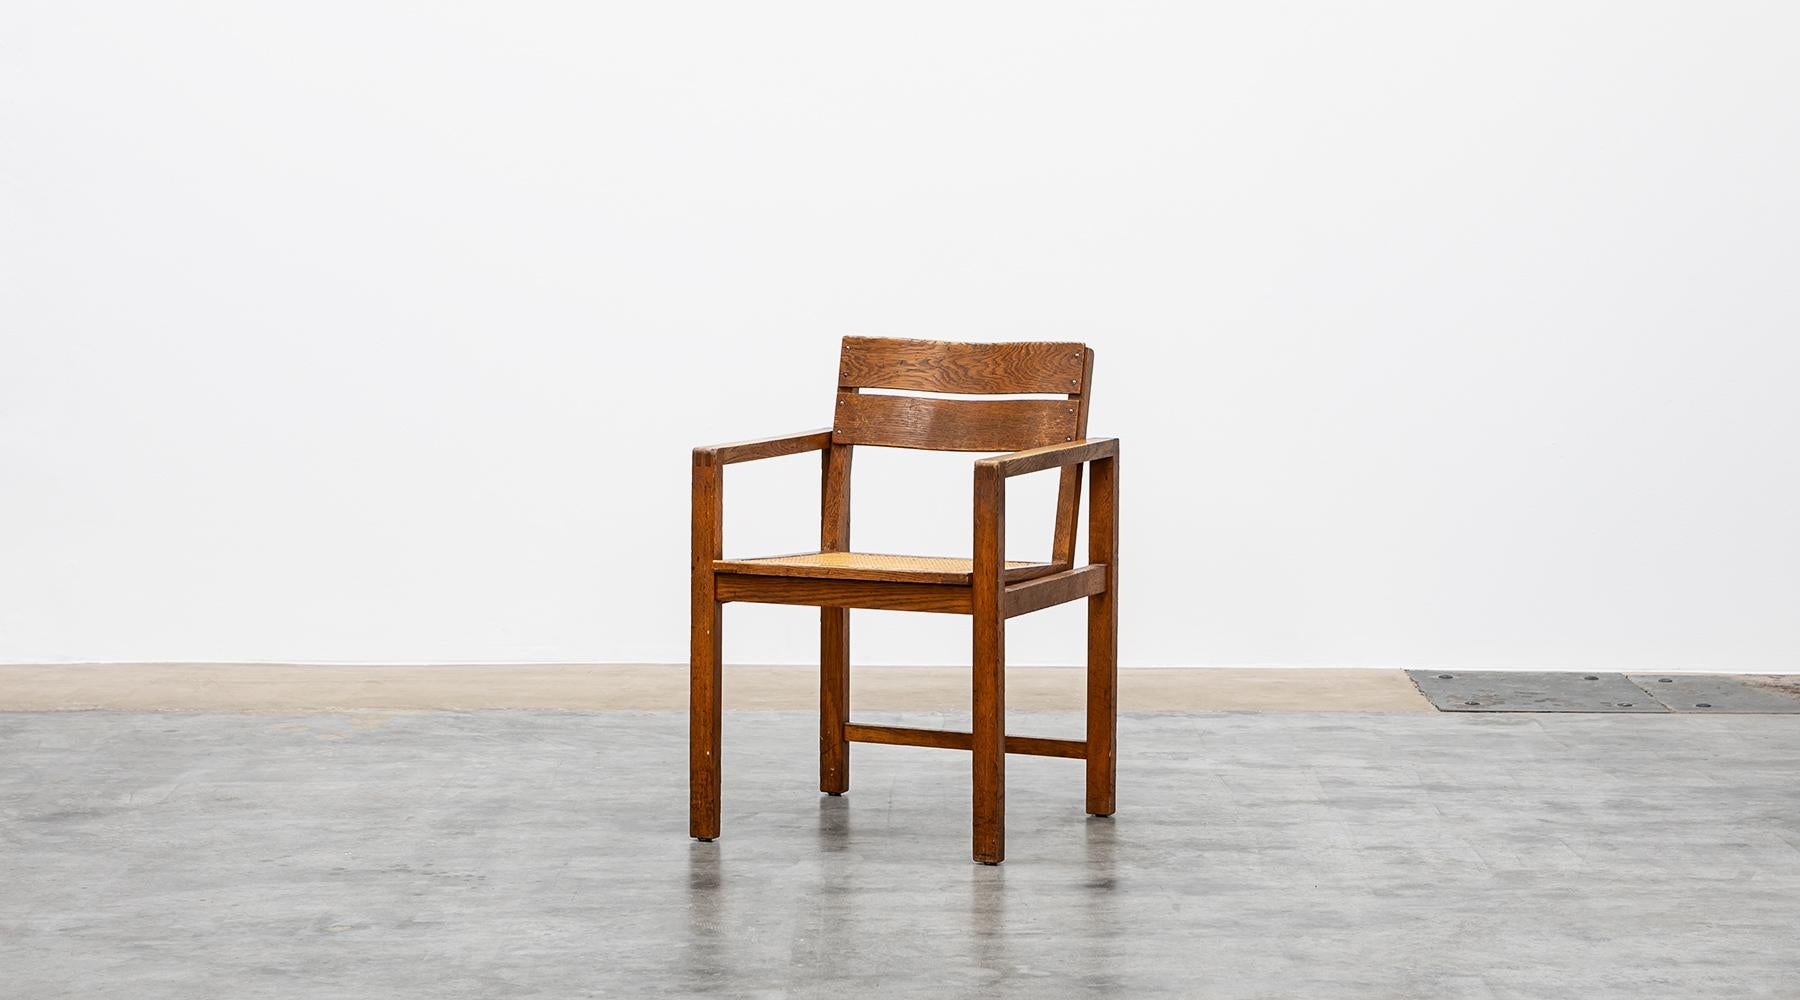 Beech chair by Erich Dieckmann, Germany, 1926.

The single chair by Erich Dieckmann from 1926 is made out of beech and has a typically, clear design. The rectangular stand construction contrasts with the curved backrest in plywood beech.